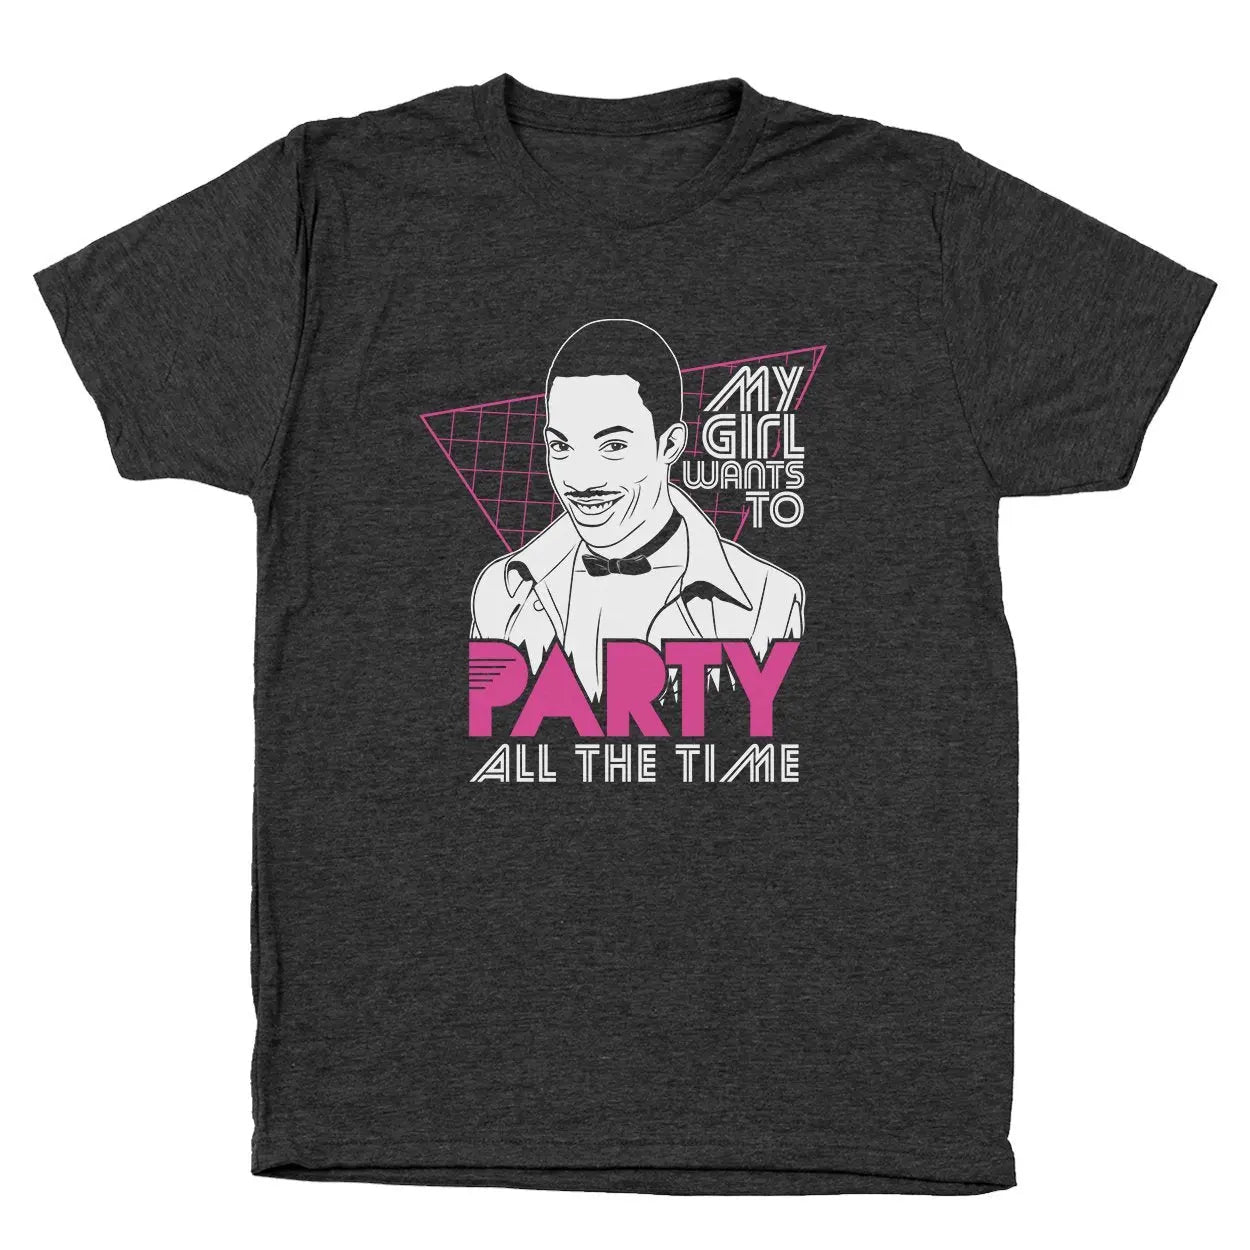 My Girl Wants To Party All The Time Tshirt - Donkey Tees